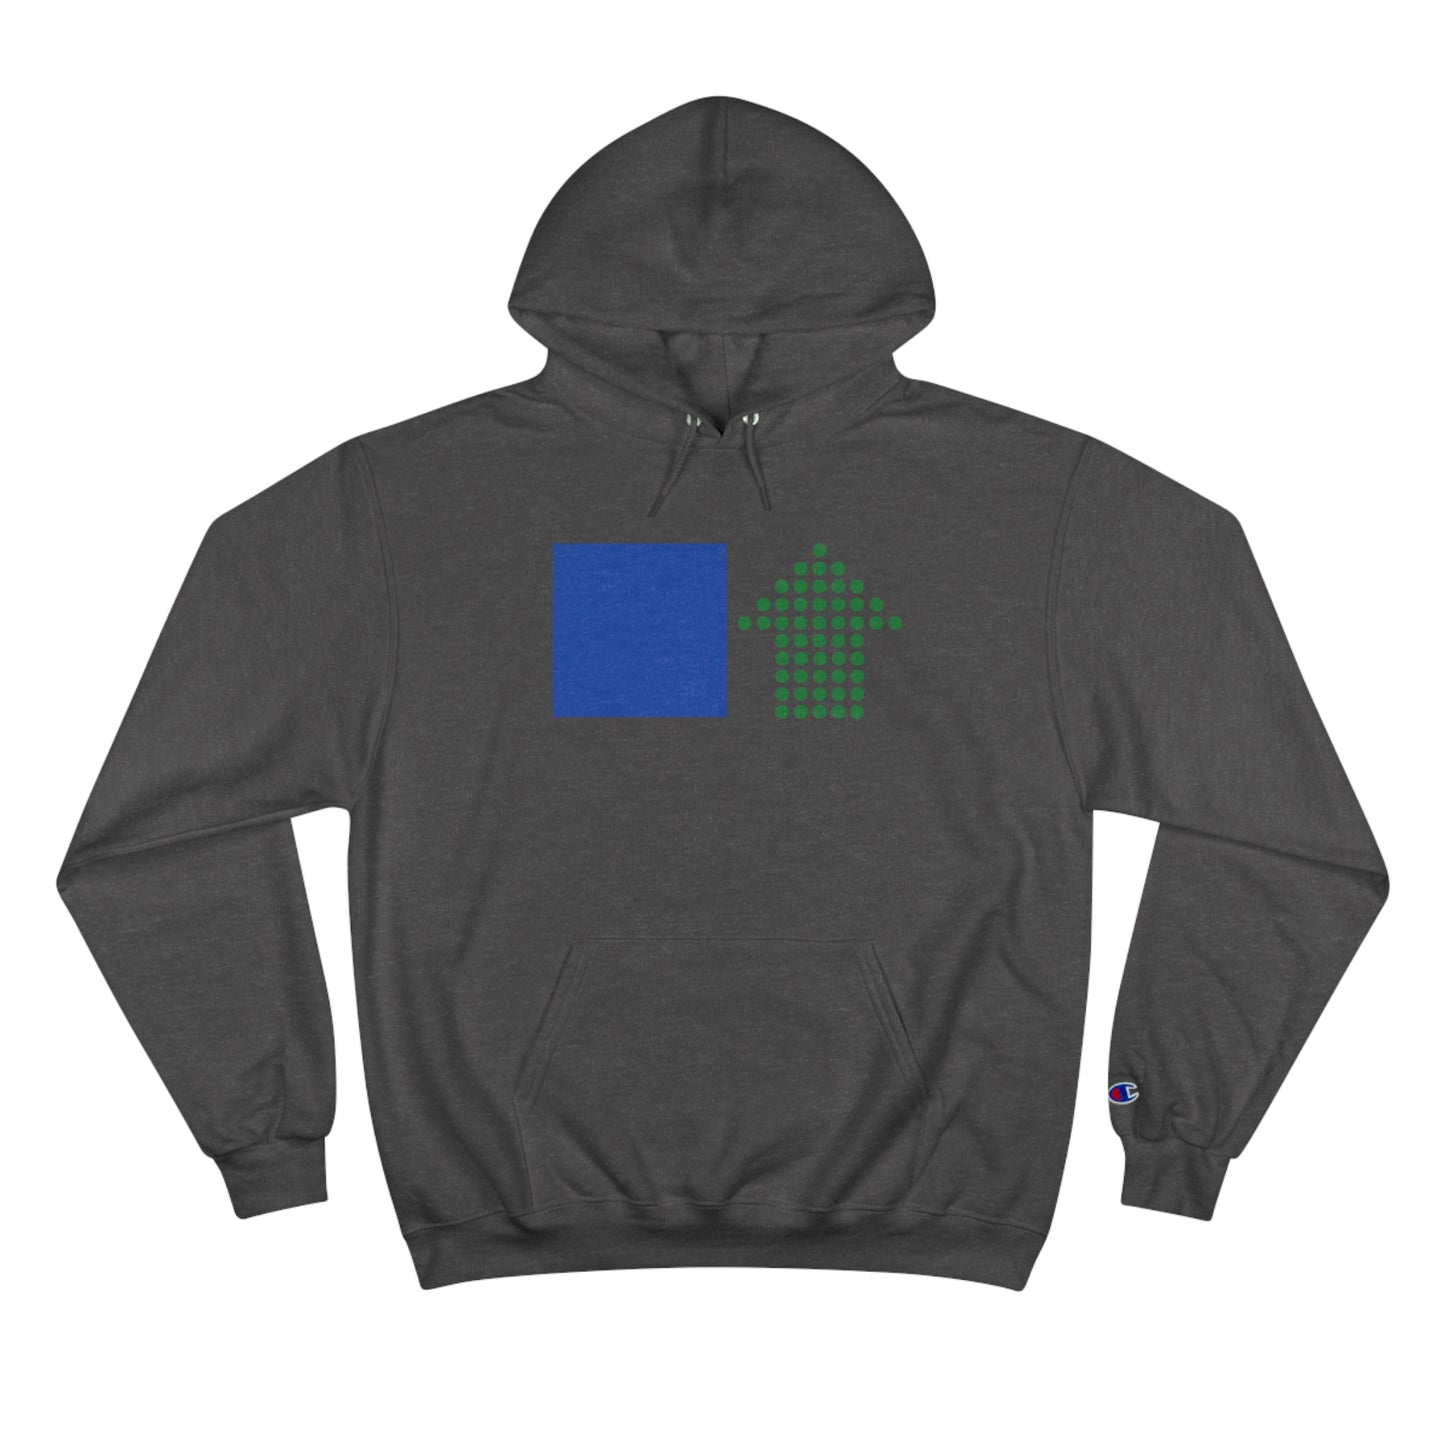 Square Up Hoodie by FortiPhi